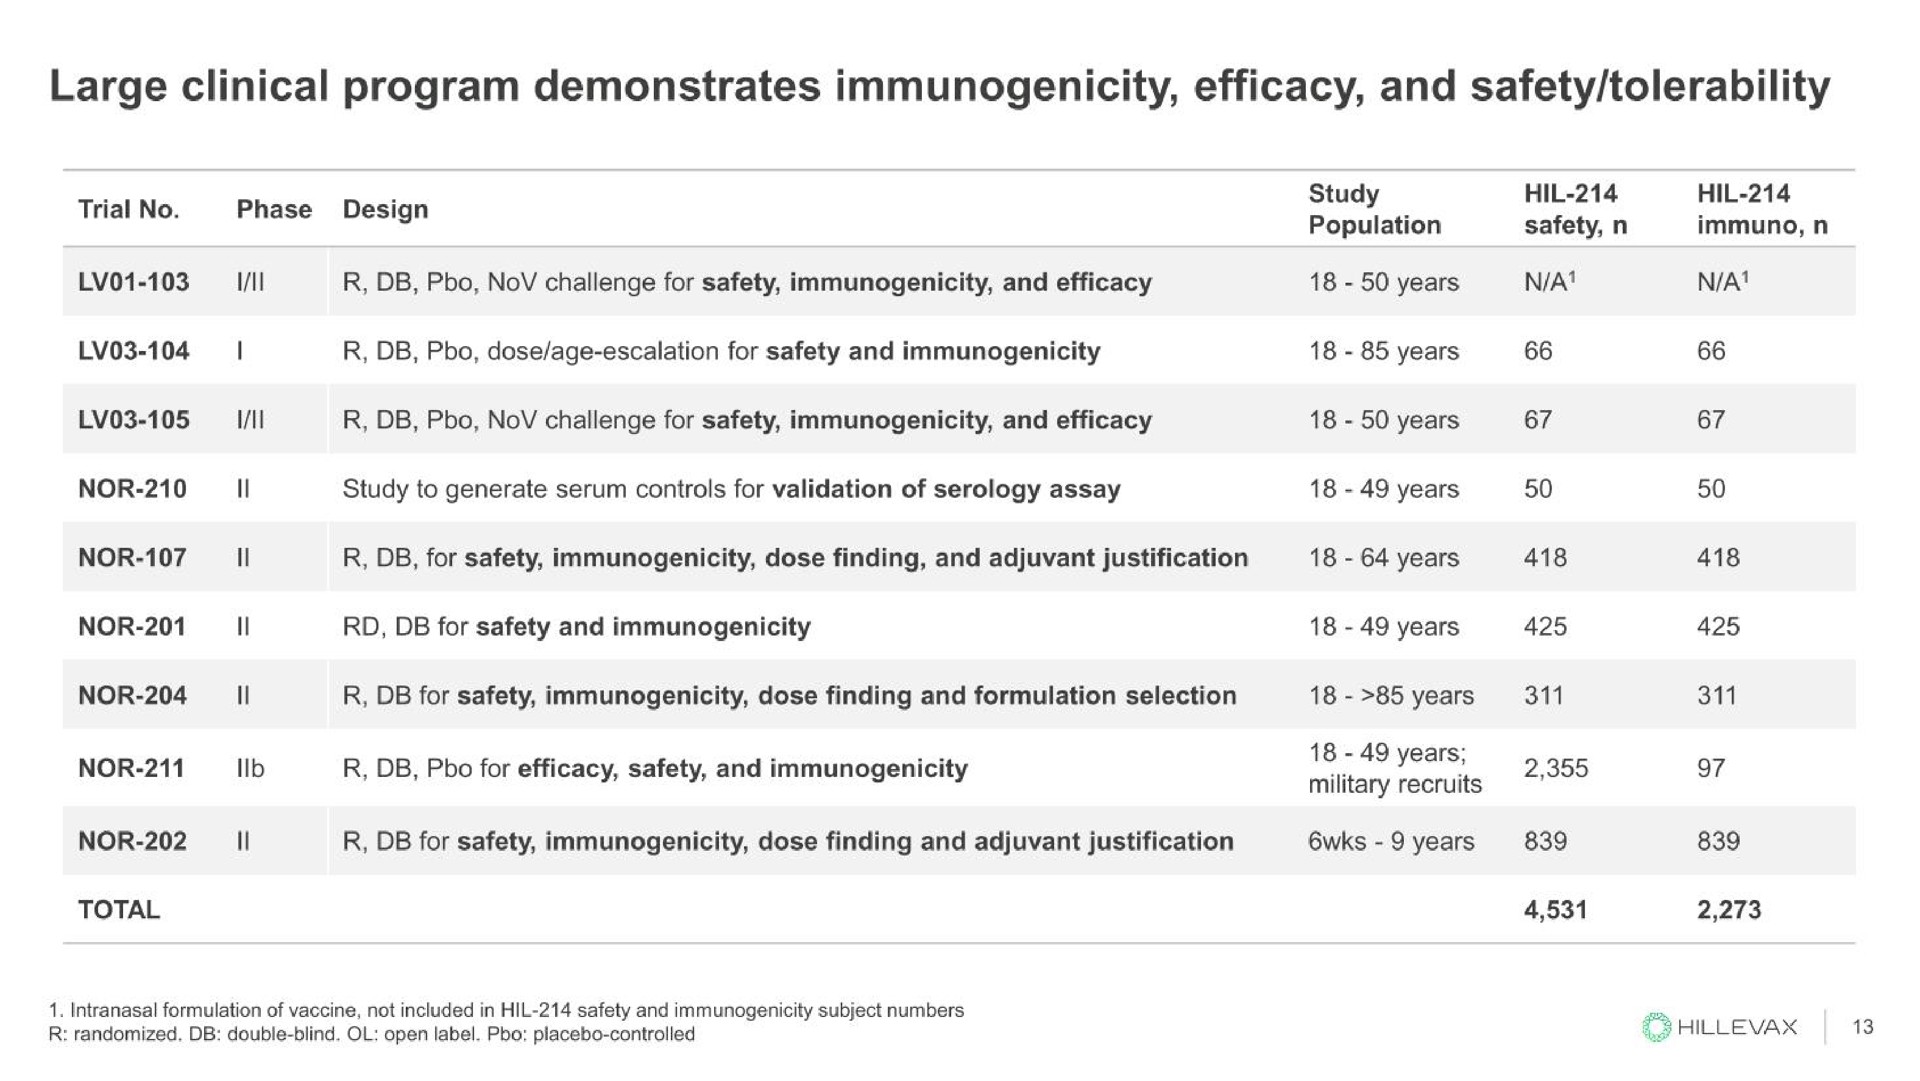 large clinical program demonstrates immunogenicity efficacy and safety tolerability | Hillevax